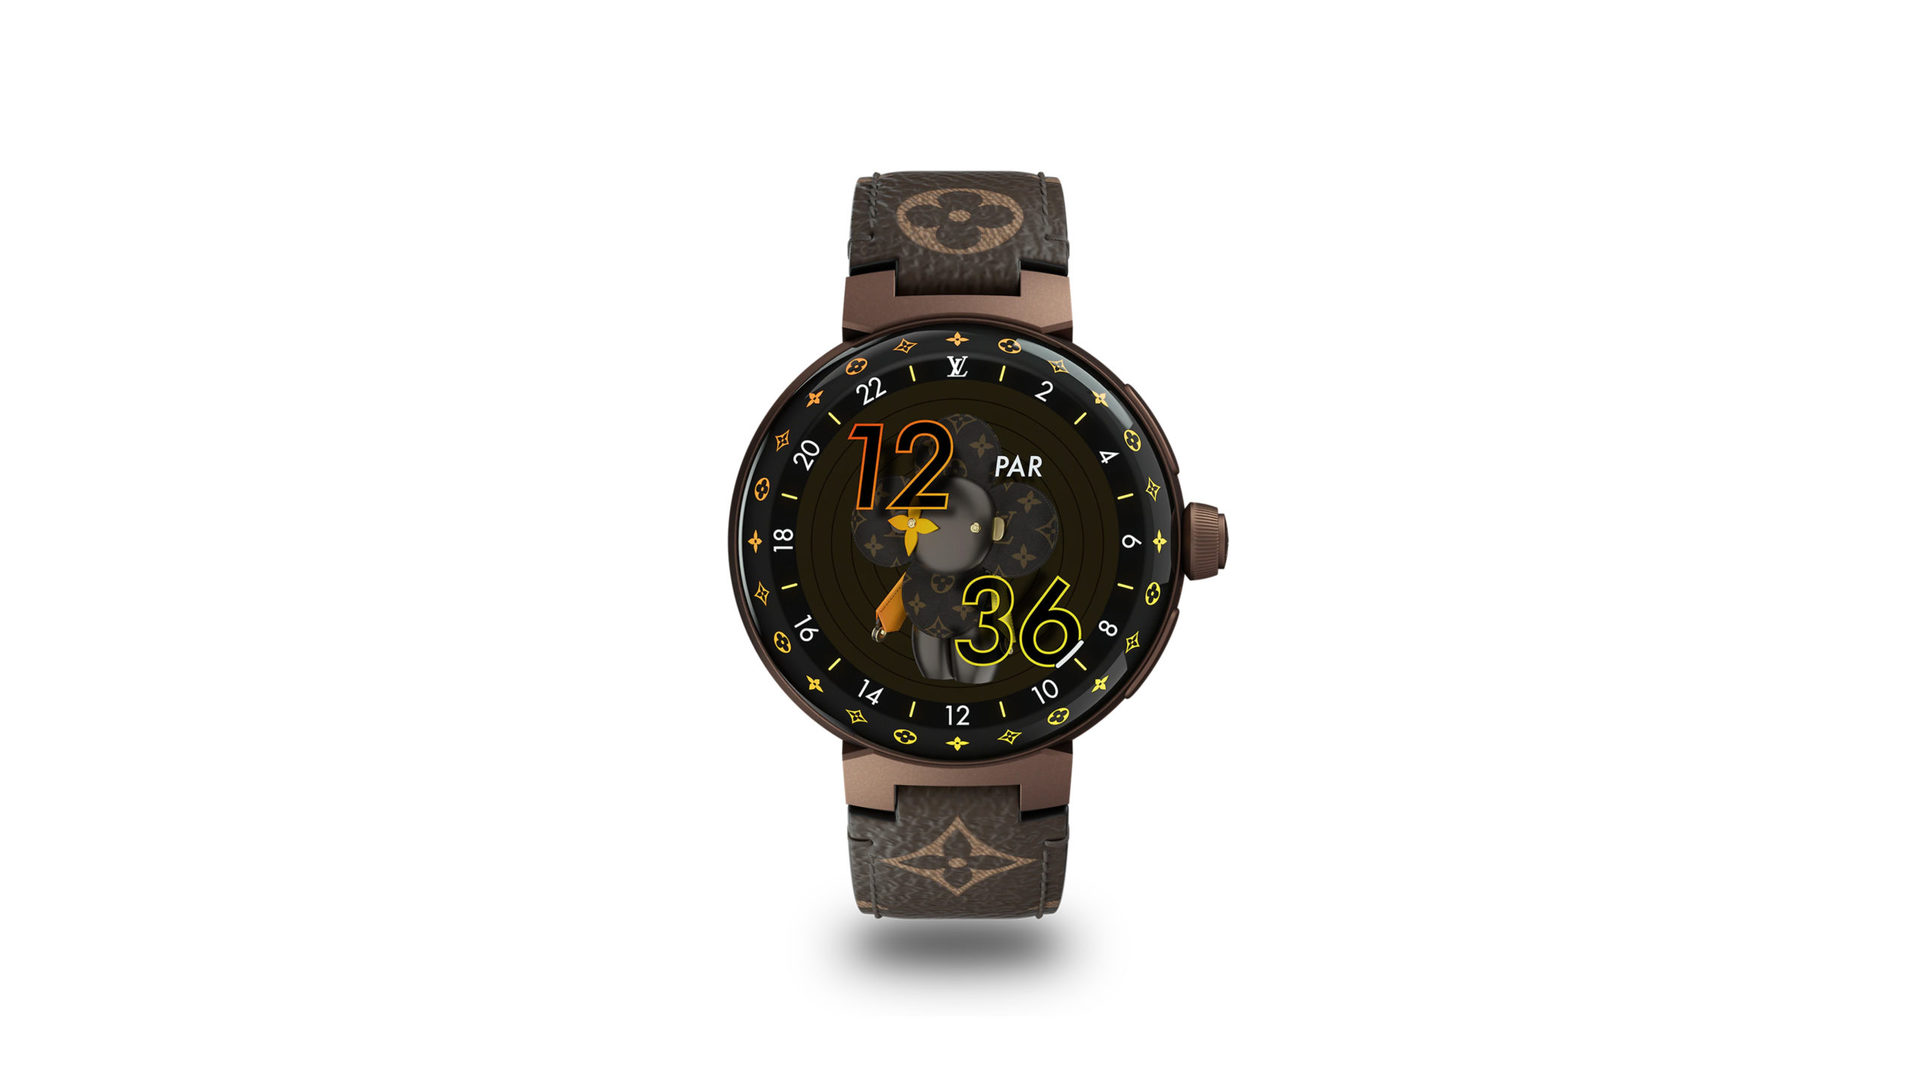 Tambour Horizon Light Up Connected Watch - Watches - Connected Watches